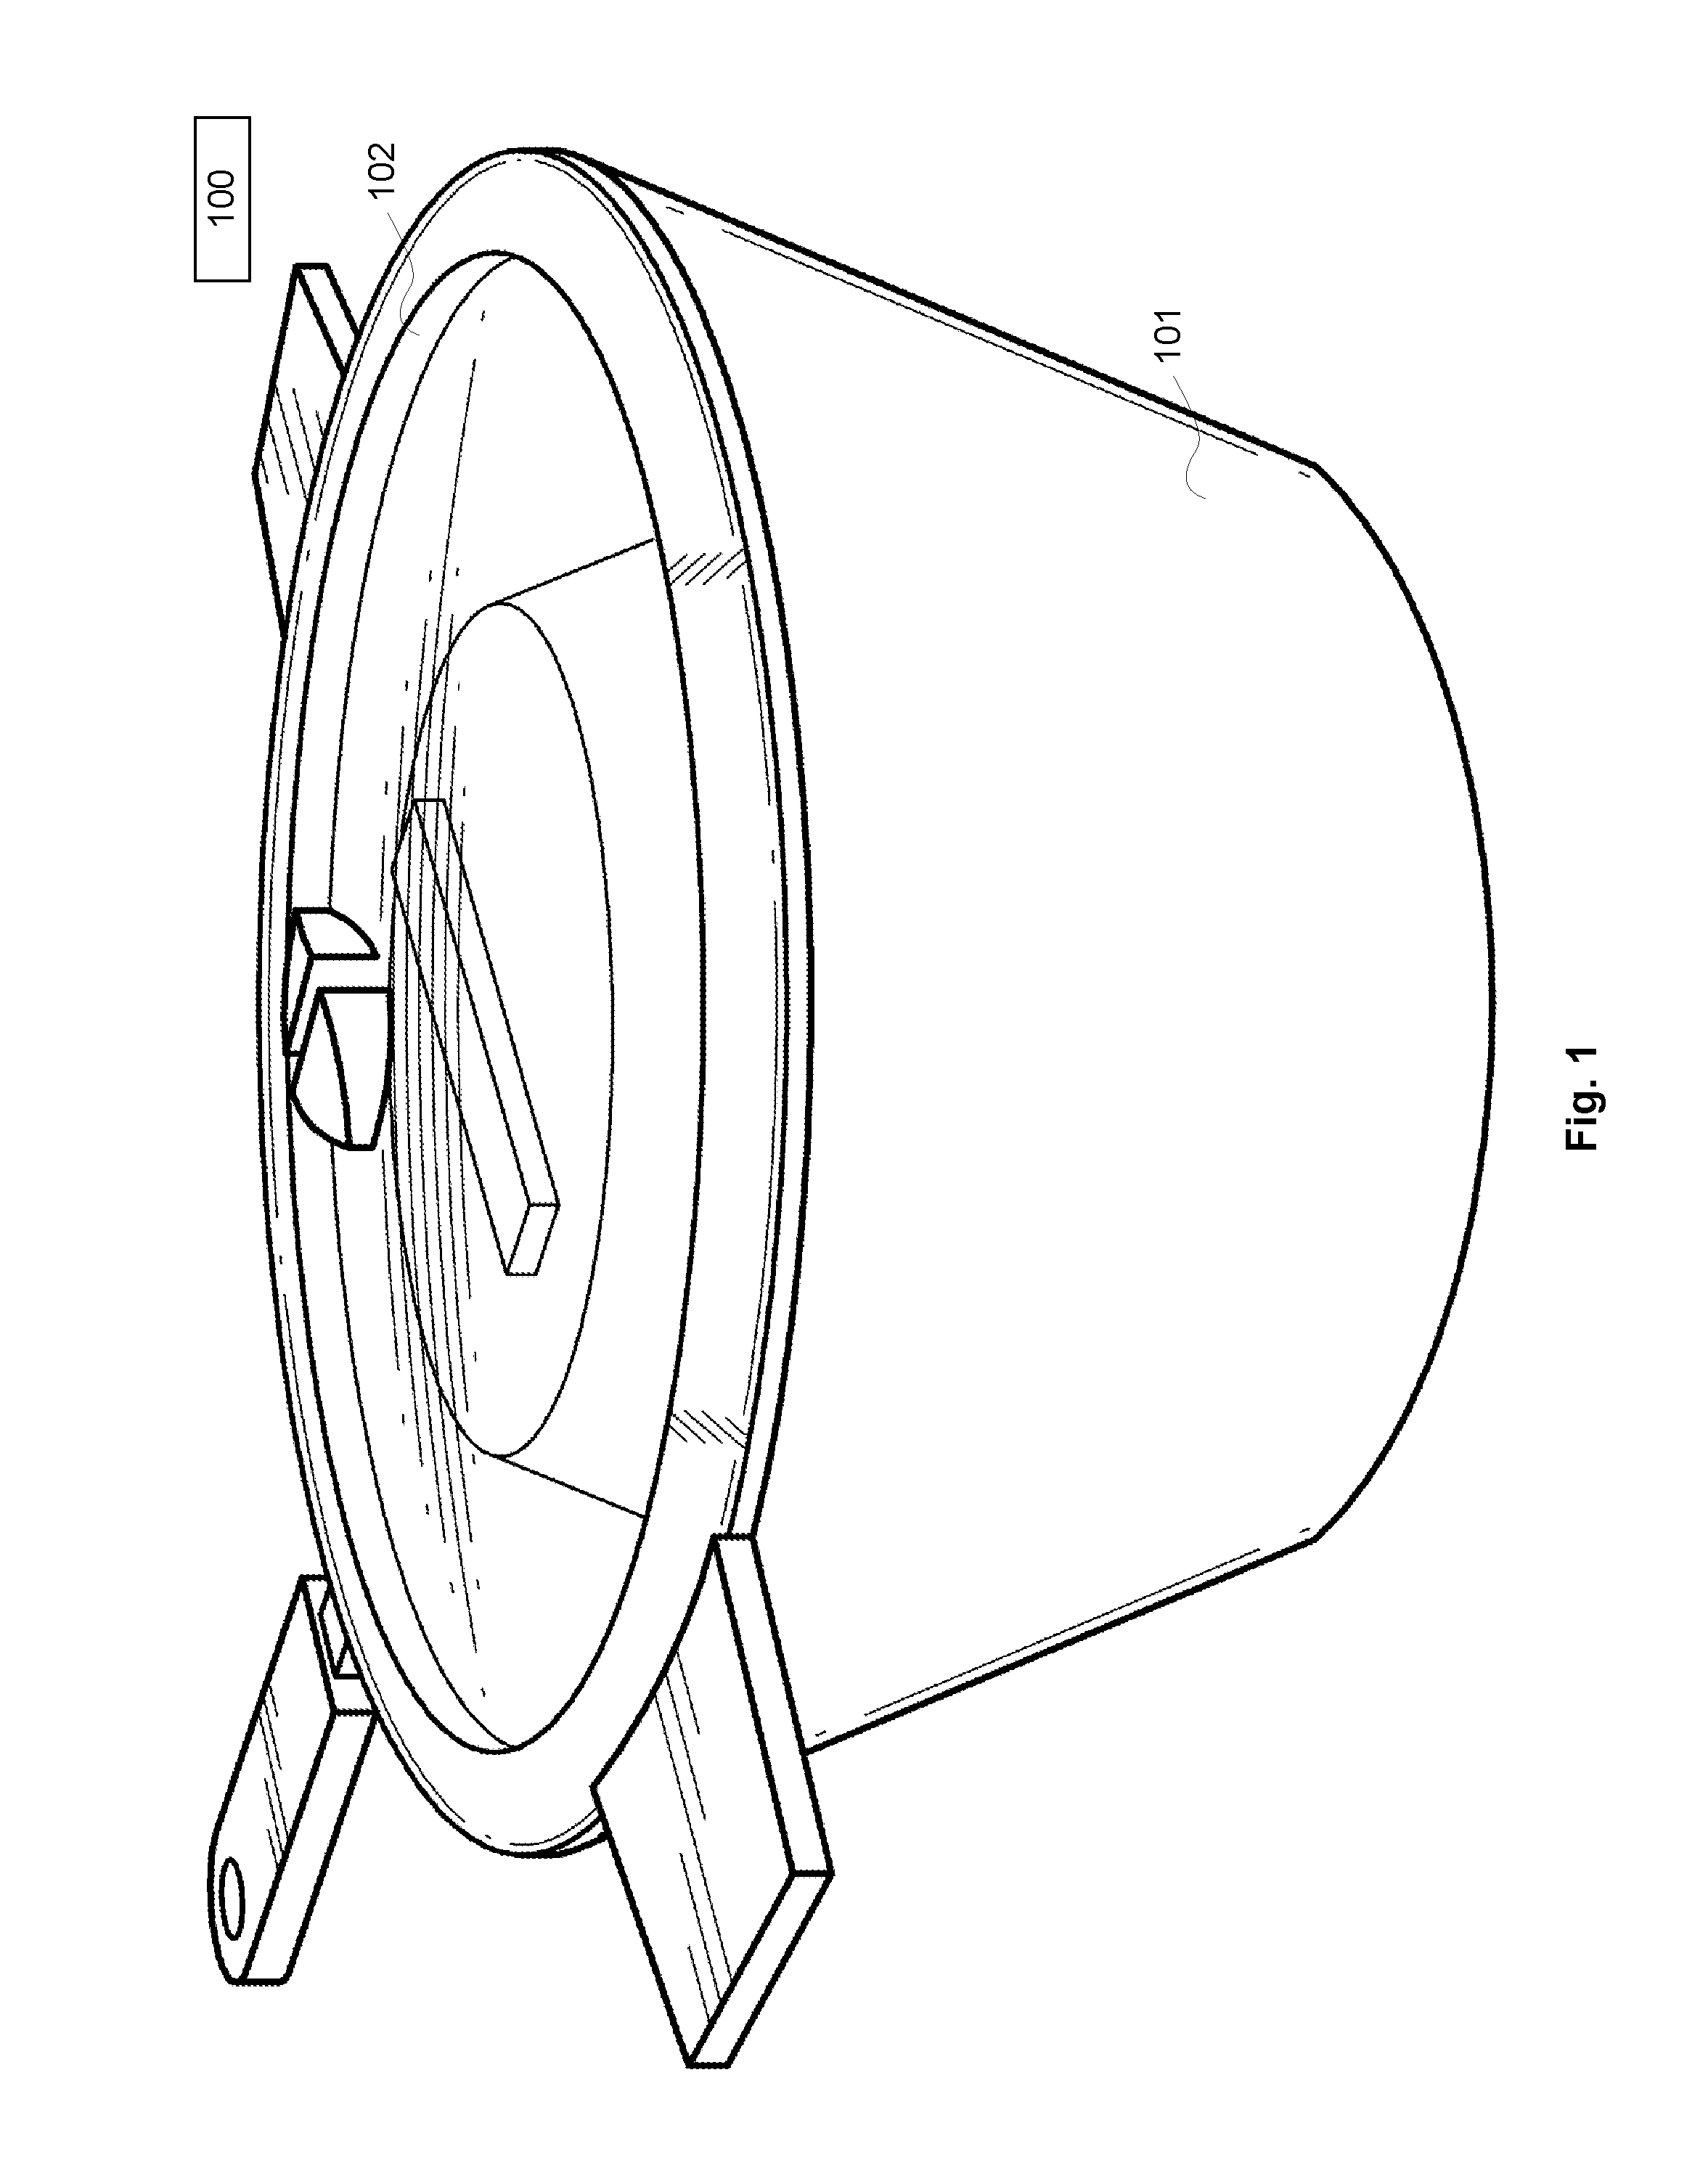 Systems and methods for preventing boilover